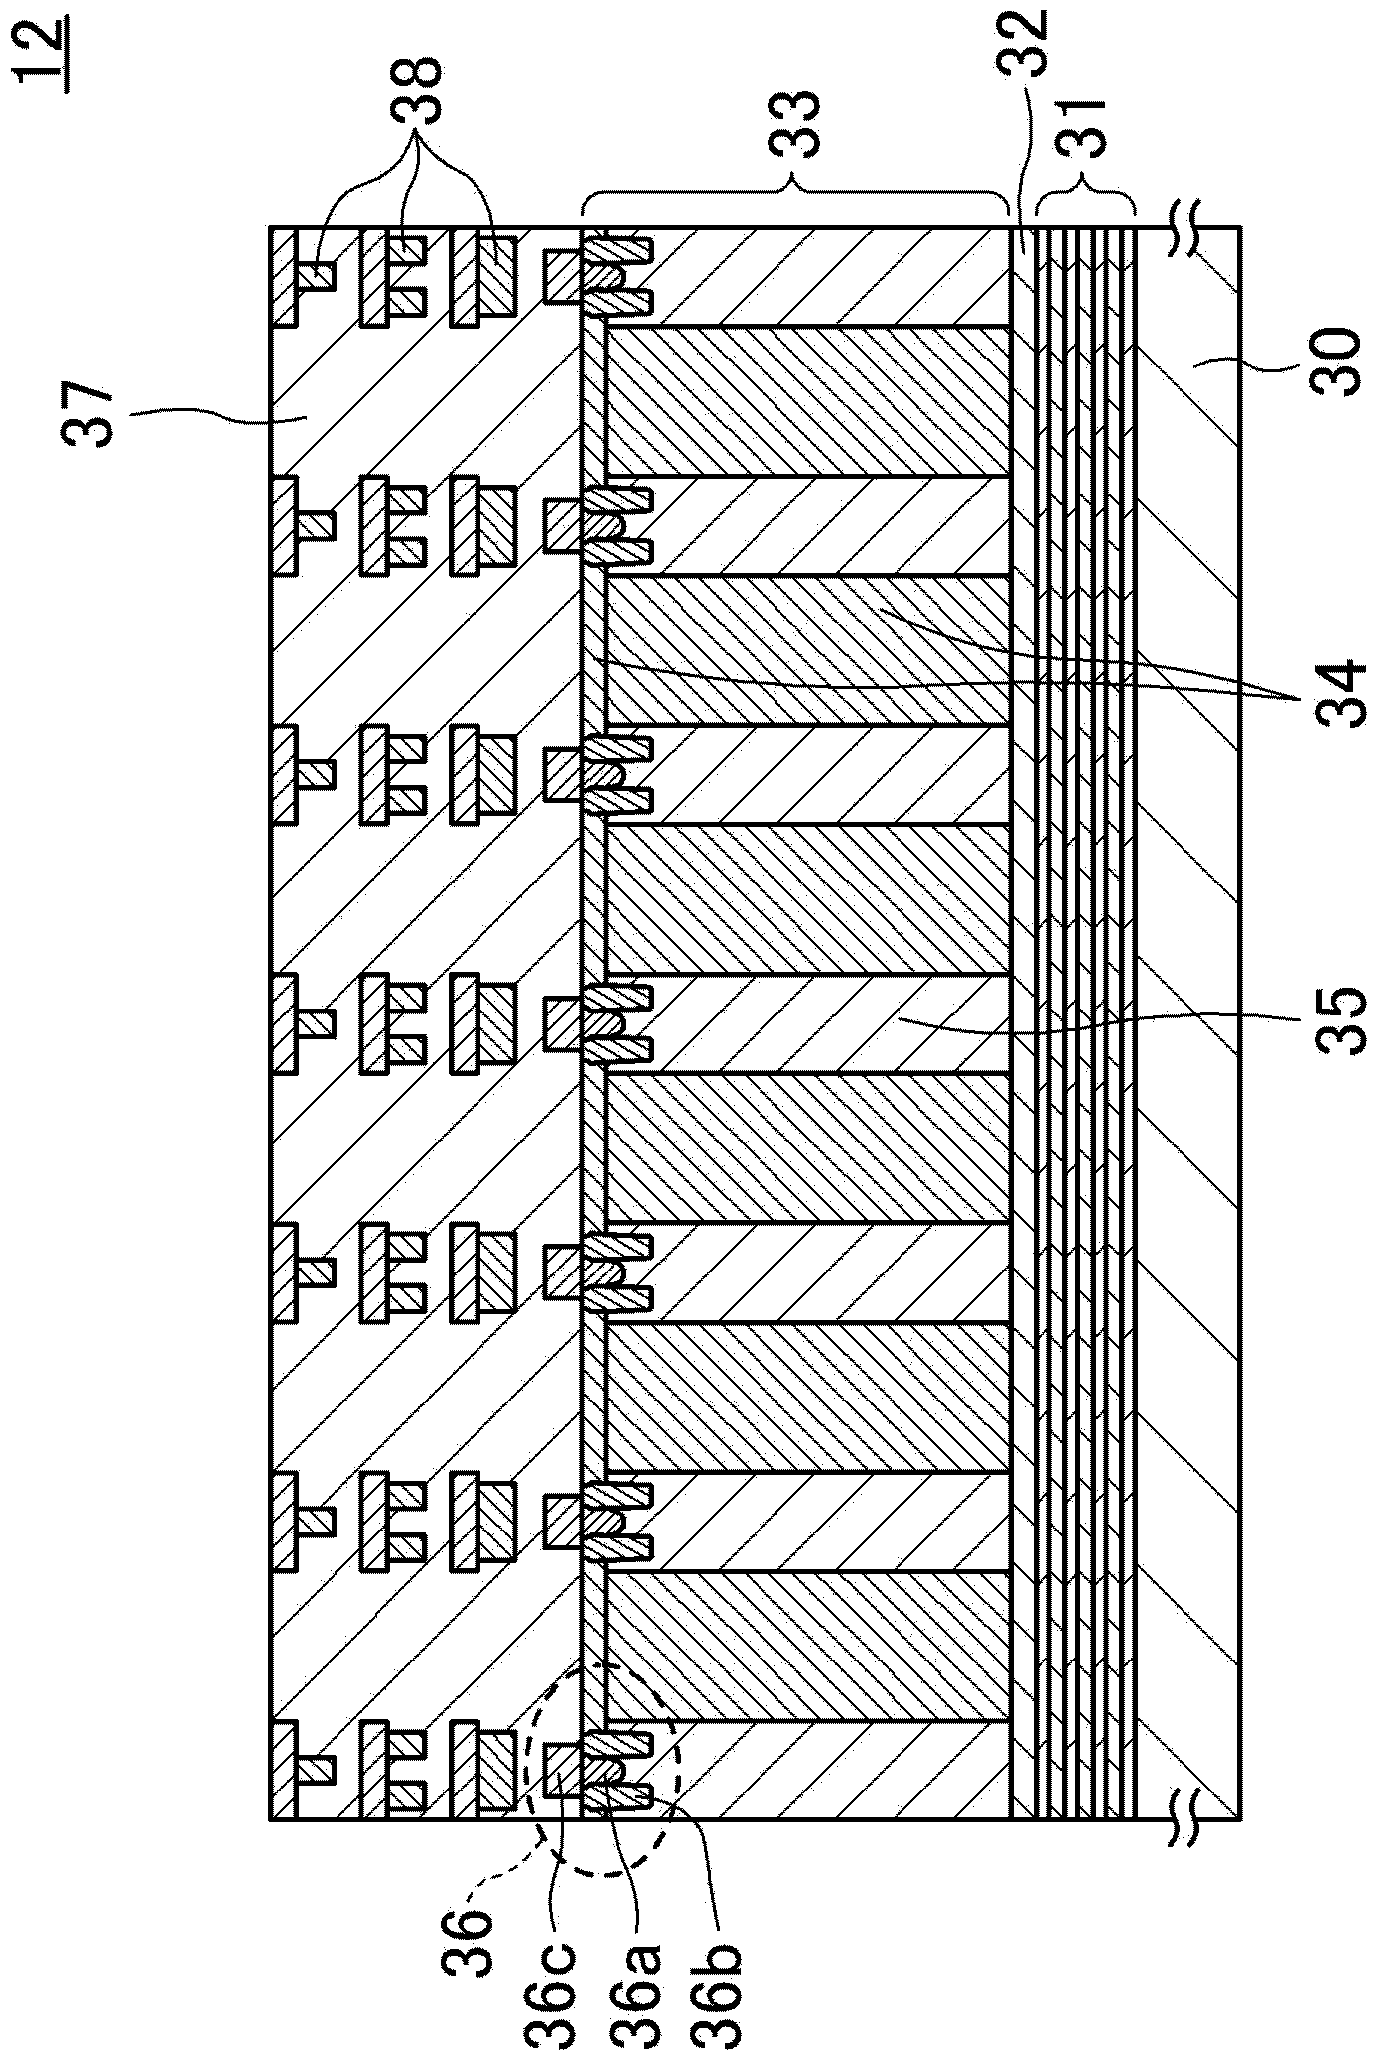 Solid-state imaging device and manufacturing method therefor